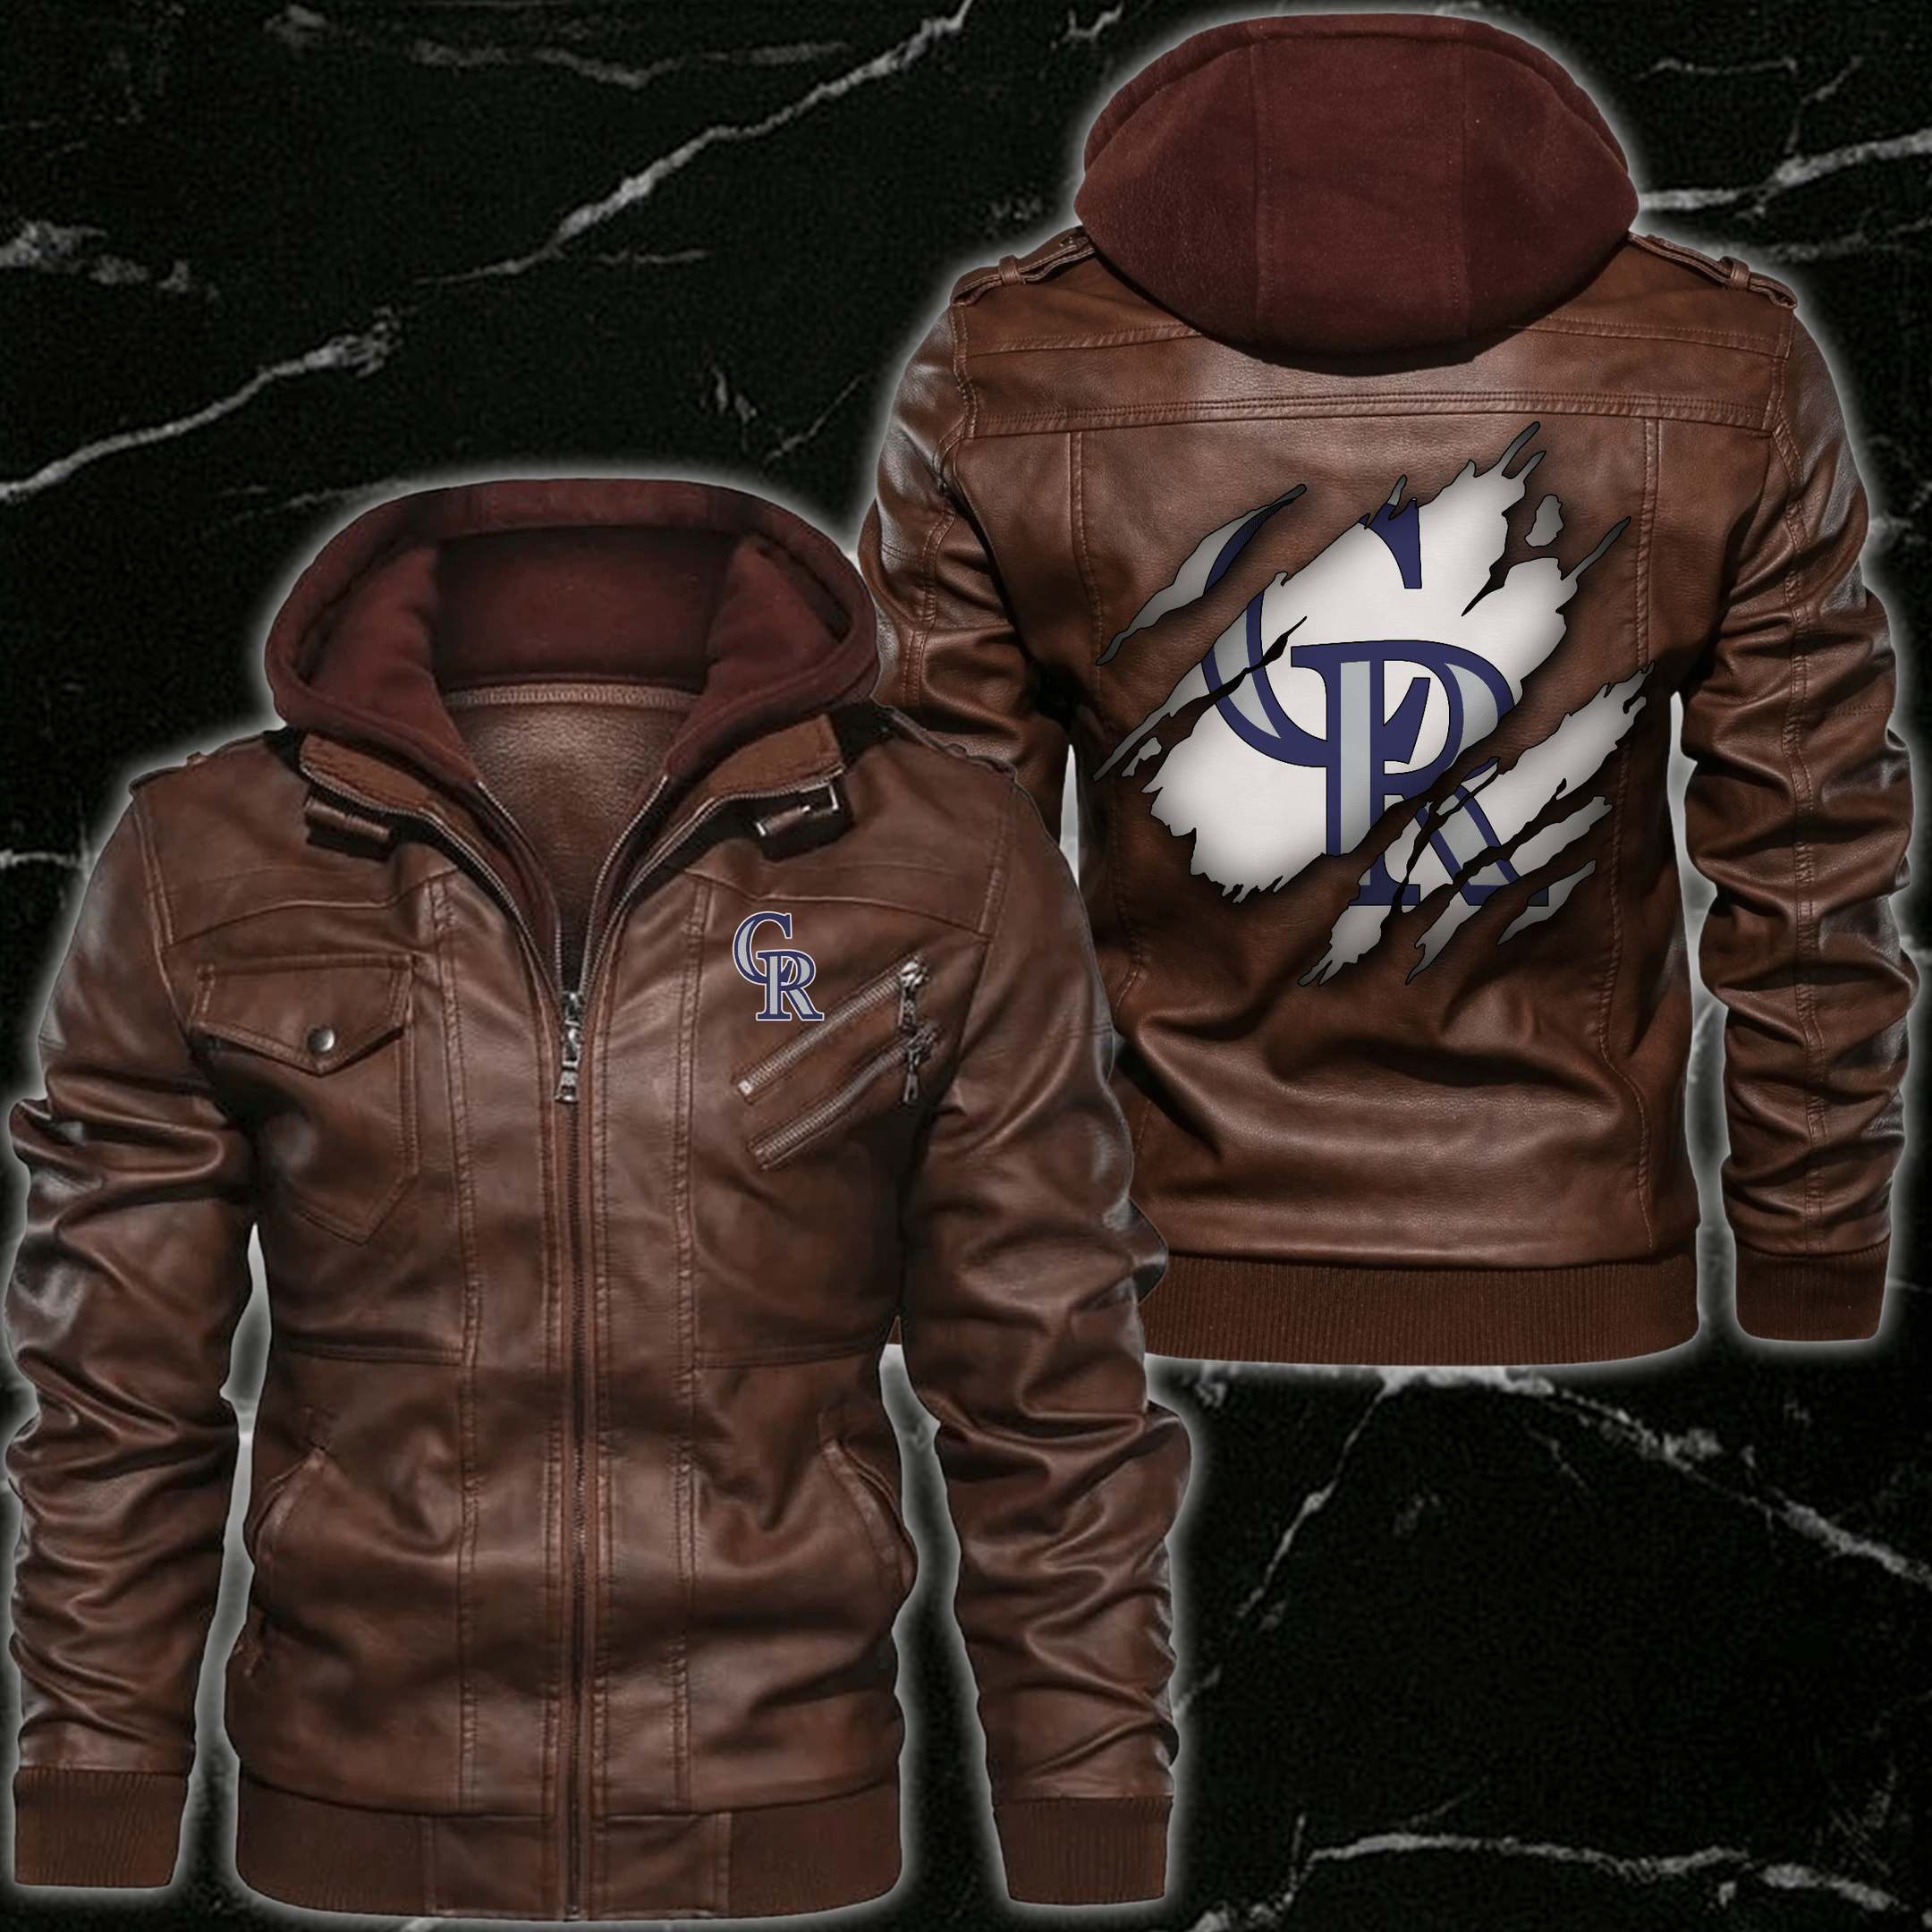 This leather Jacket will look great on you and make you stand out from the crowd 379